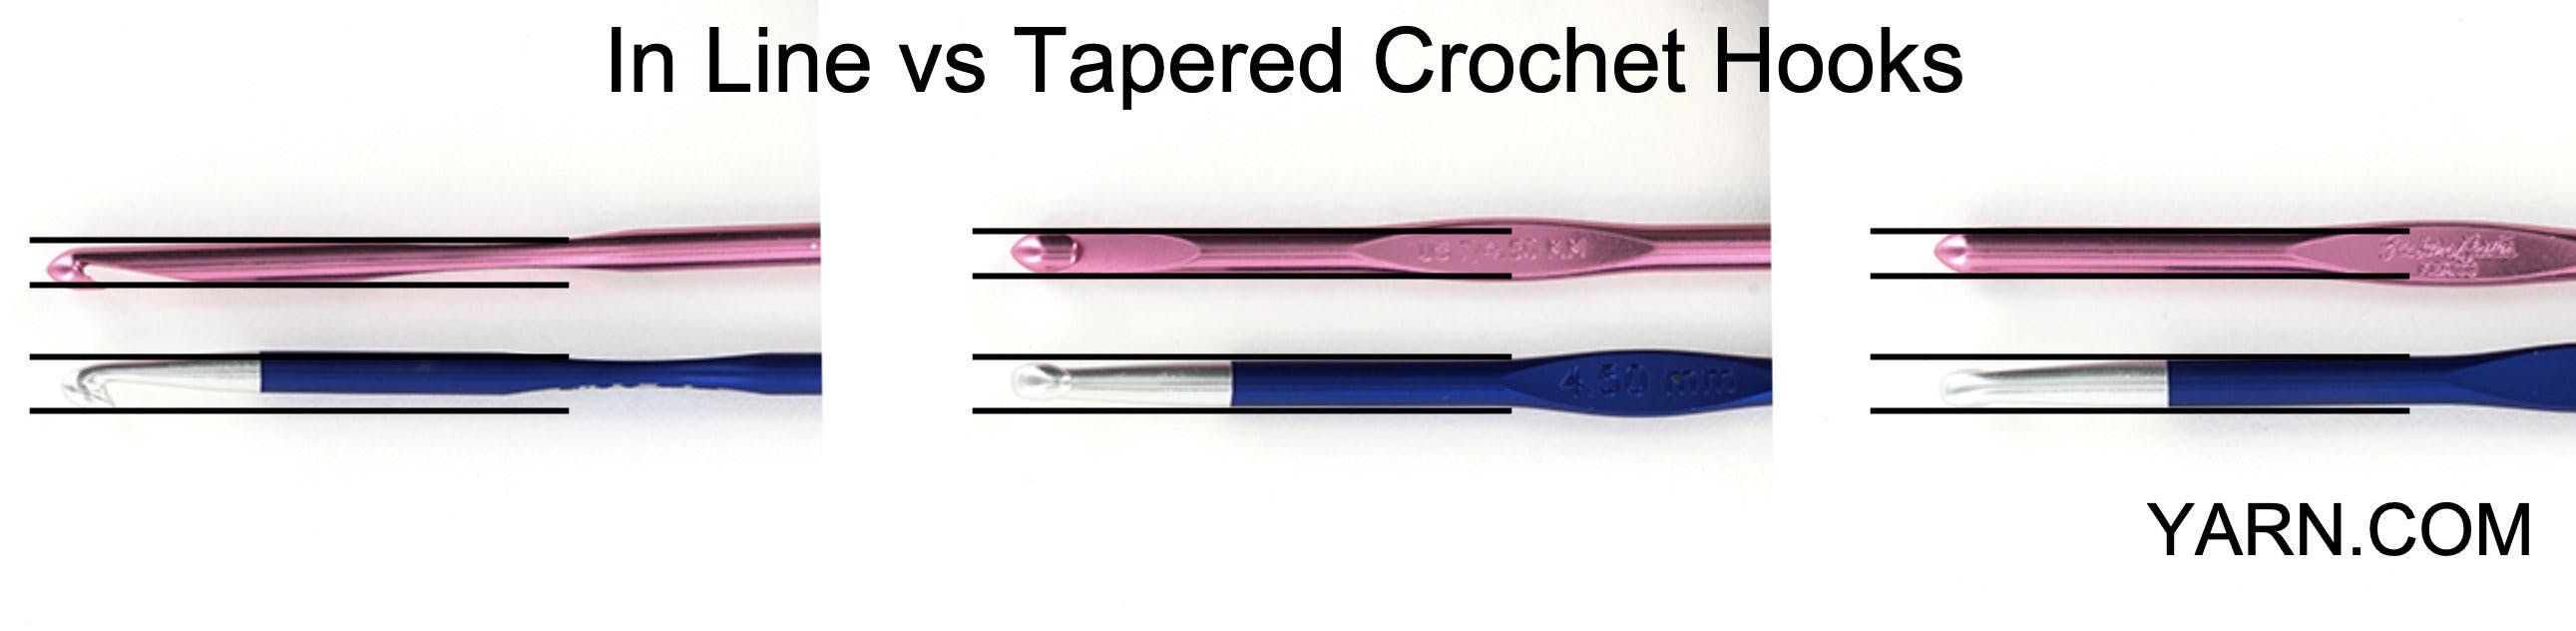 Graphic showing the difference between in line and tapered crochet hooks